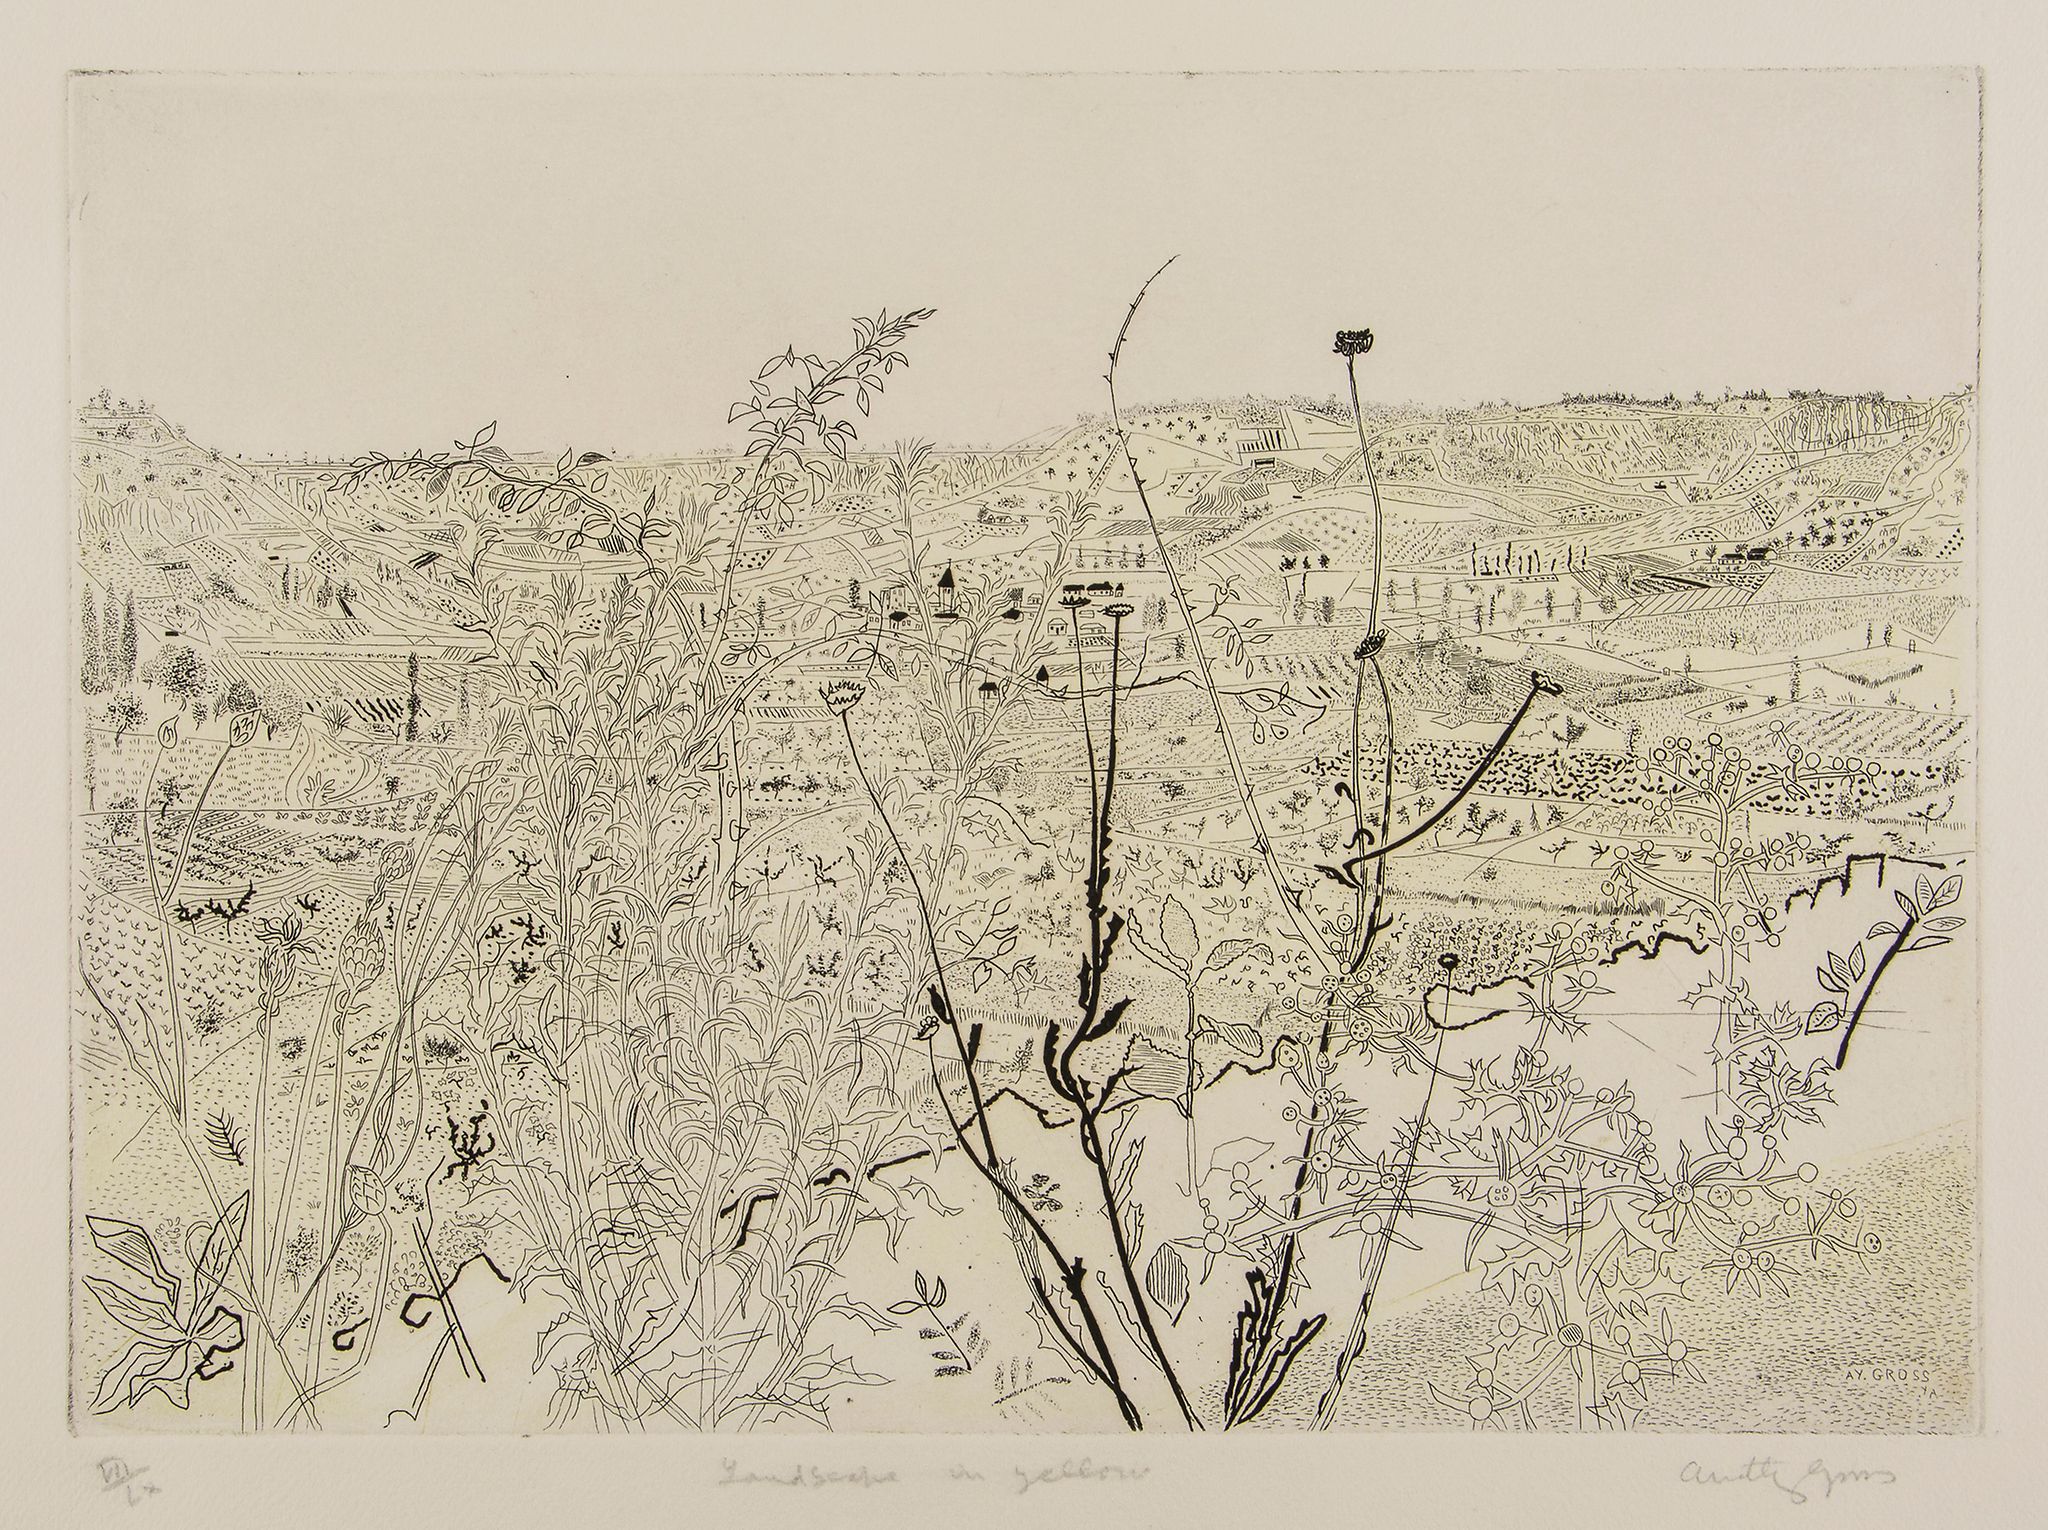 Anthony Gross (1905-1984) - Paysage du Lot etching with yellow wash, 1951, signed and titled in